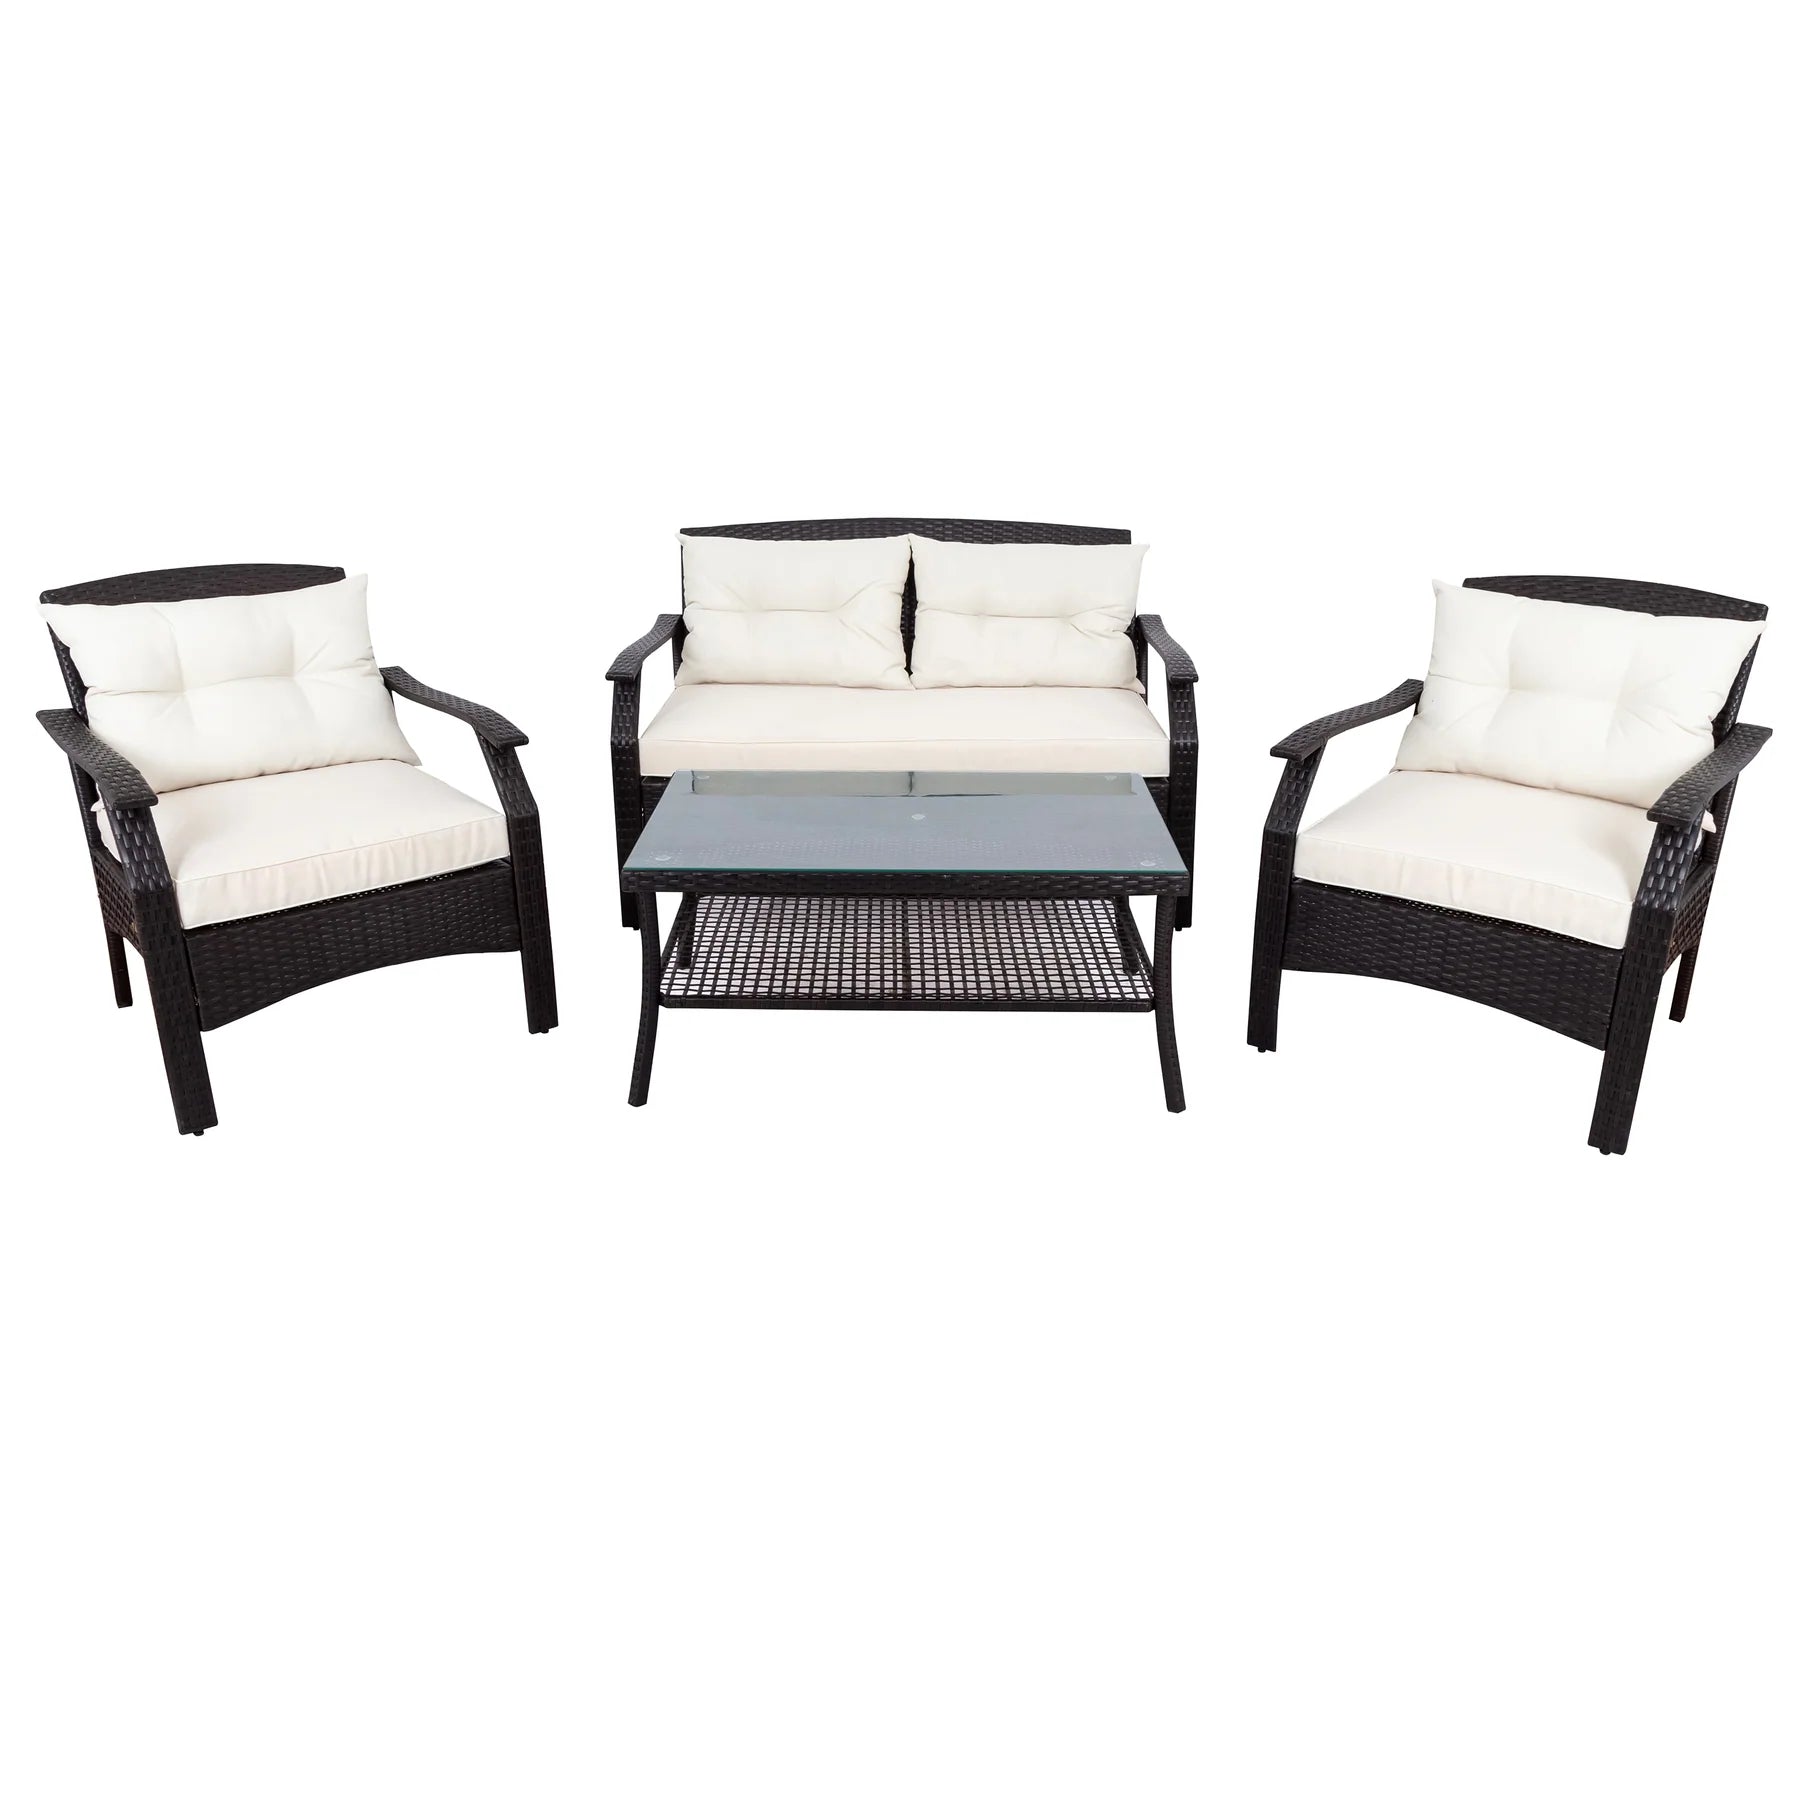 OUTDOOR SOFA SET 2 SEATER, 2 SINGLE SEATER AND 1 CENTER TABLE